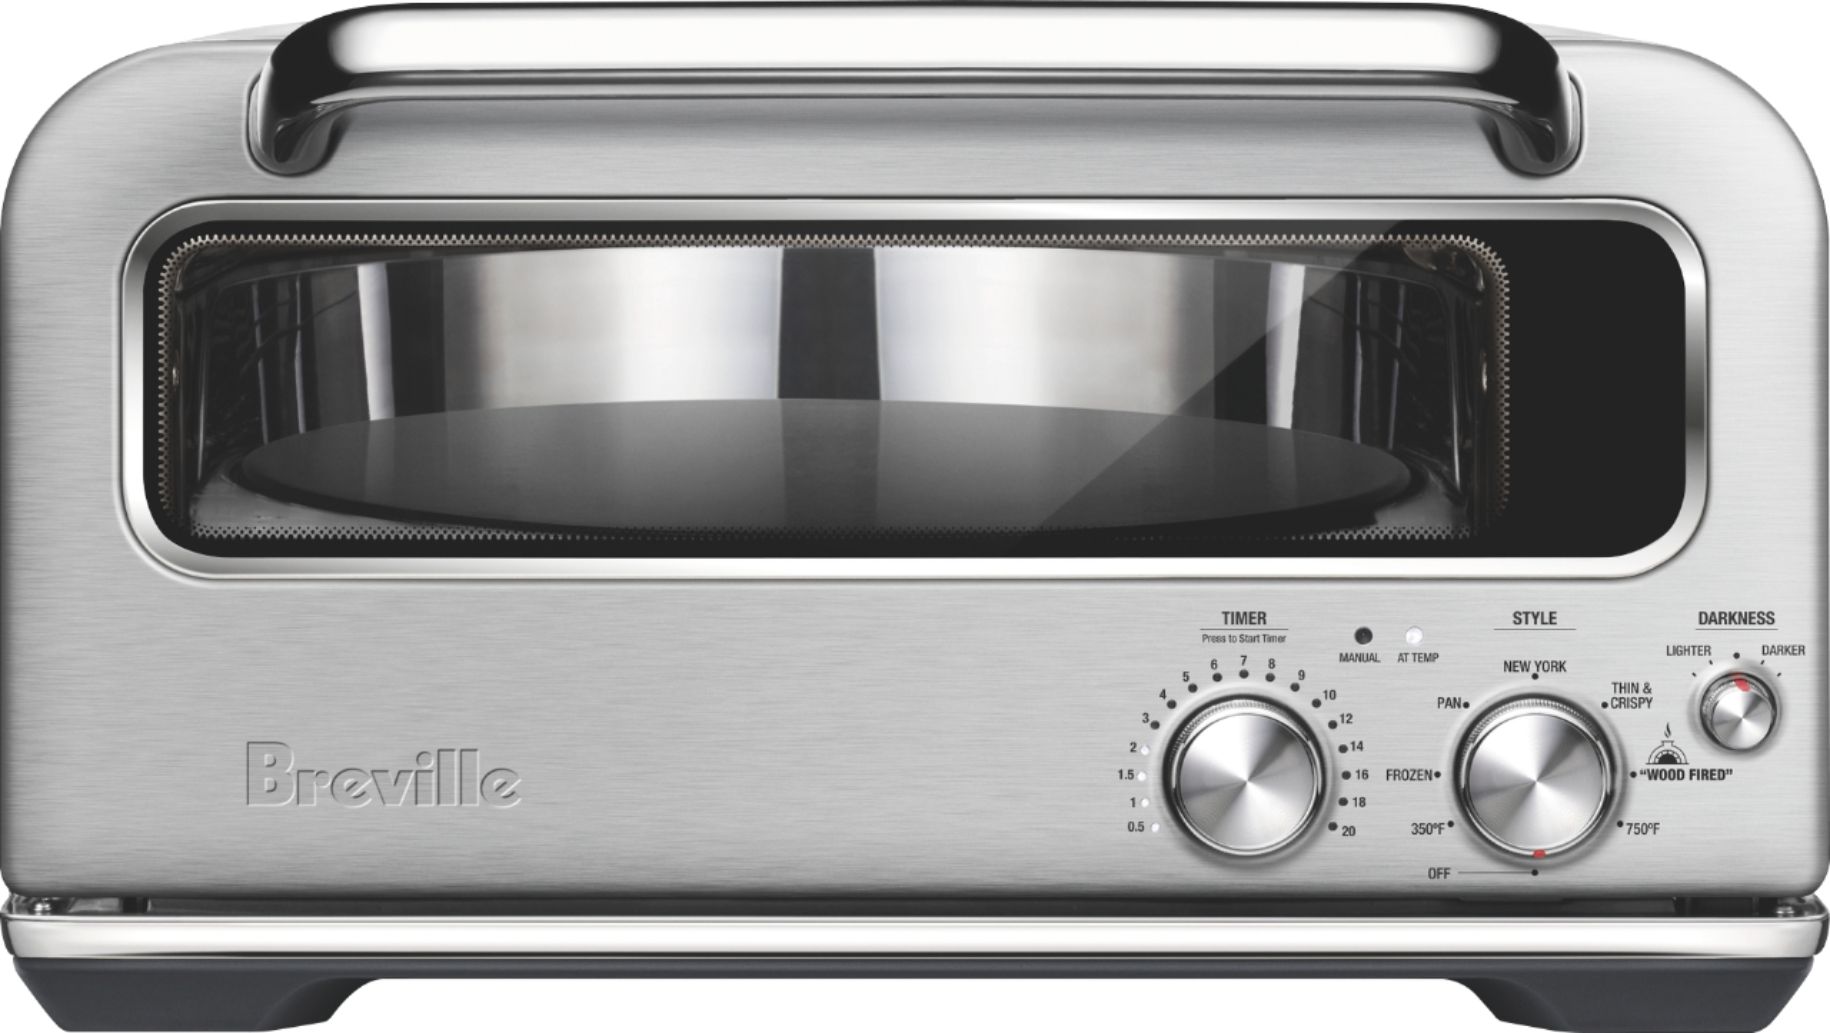 Breville Pizzaiolo Oven Review: High-End Indoor Pizza